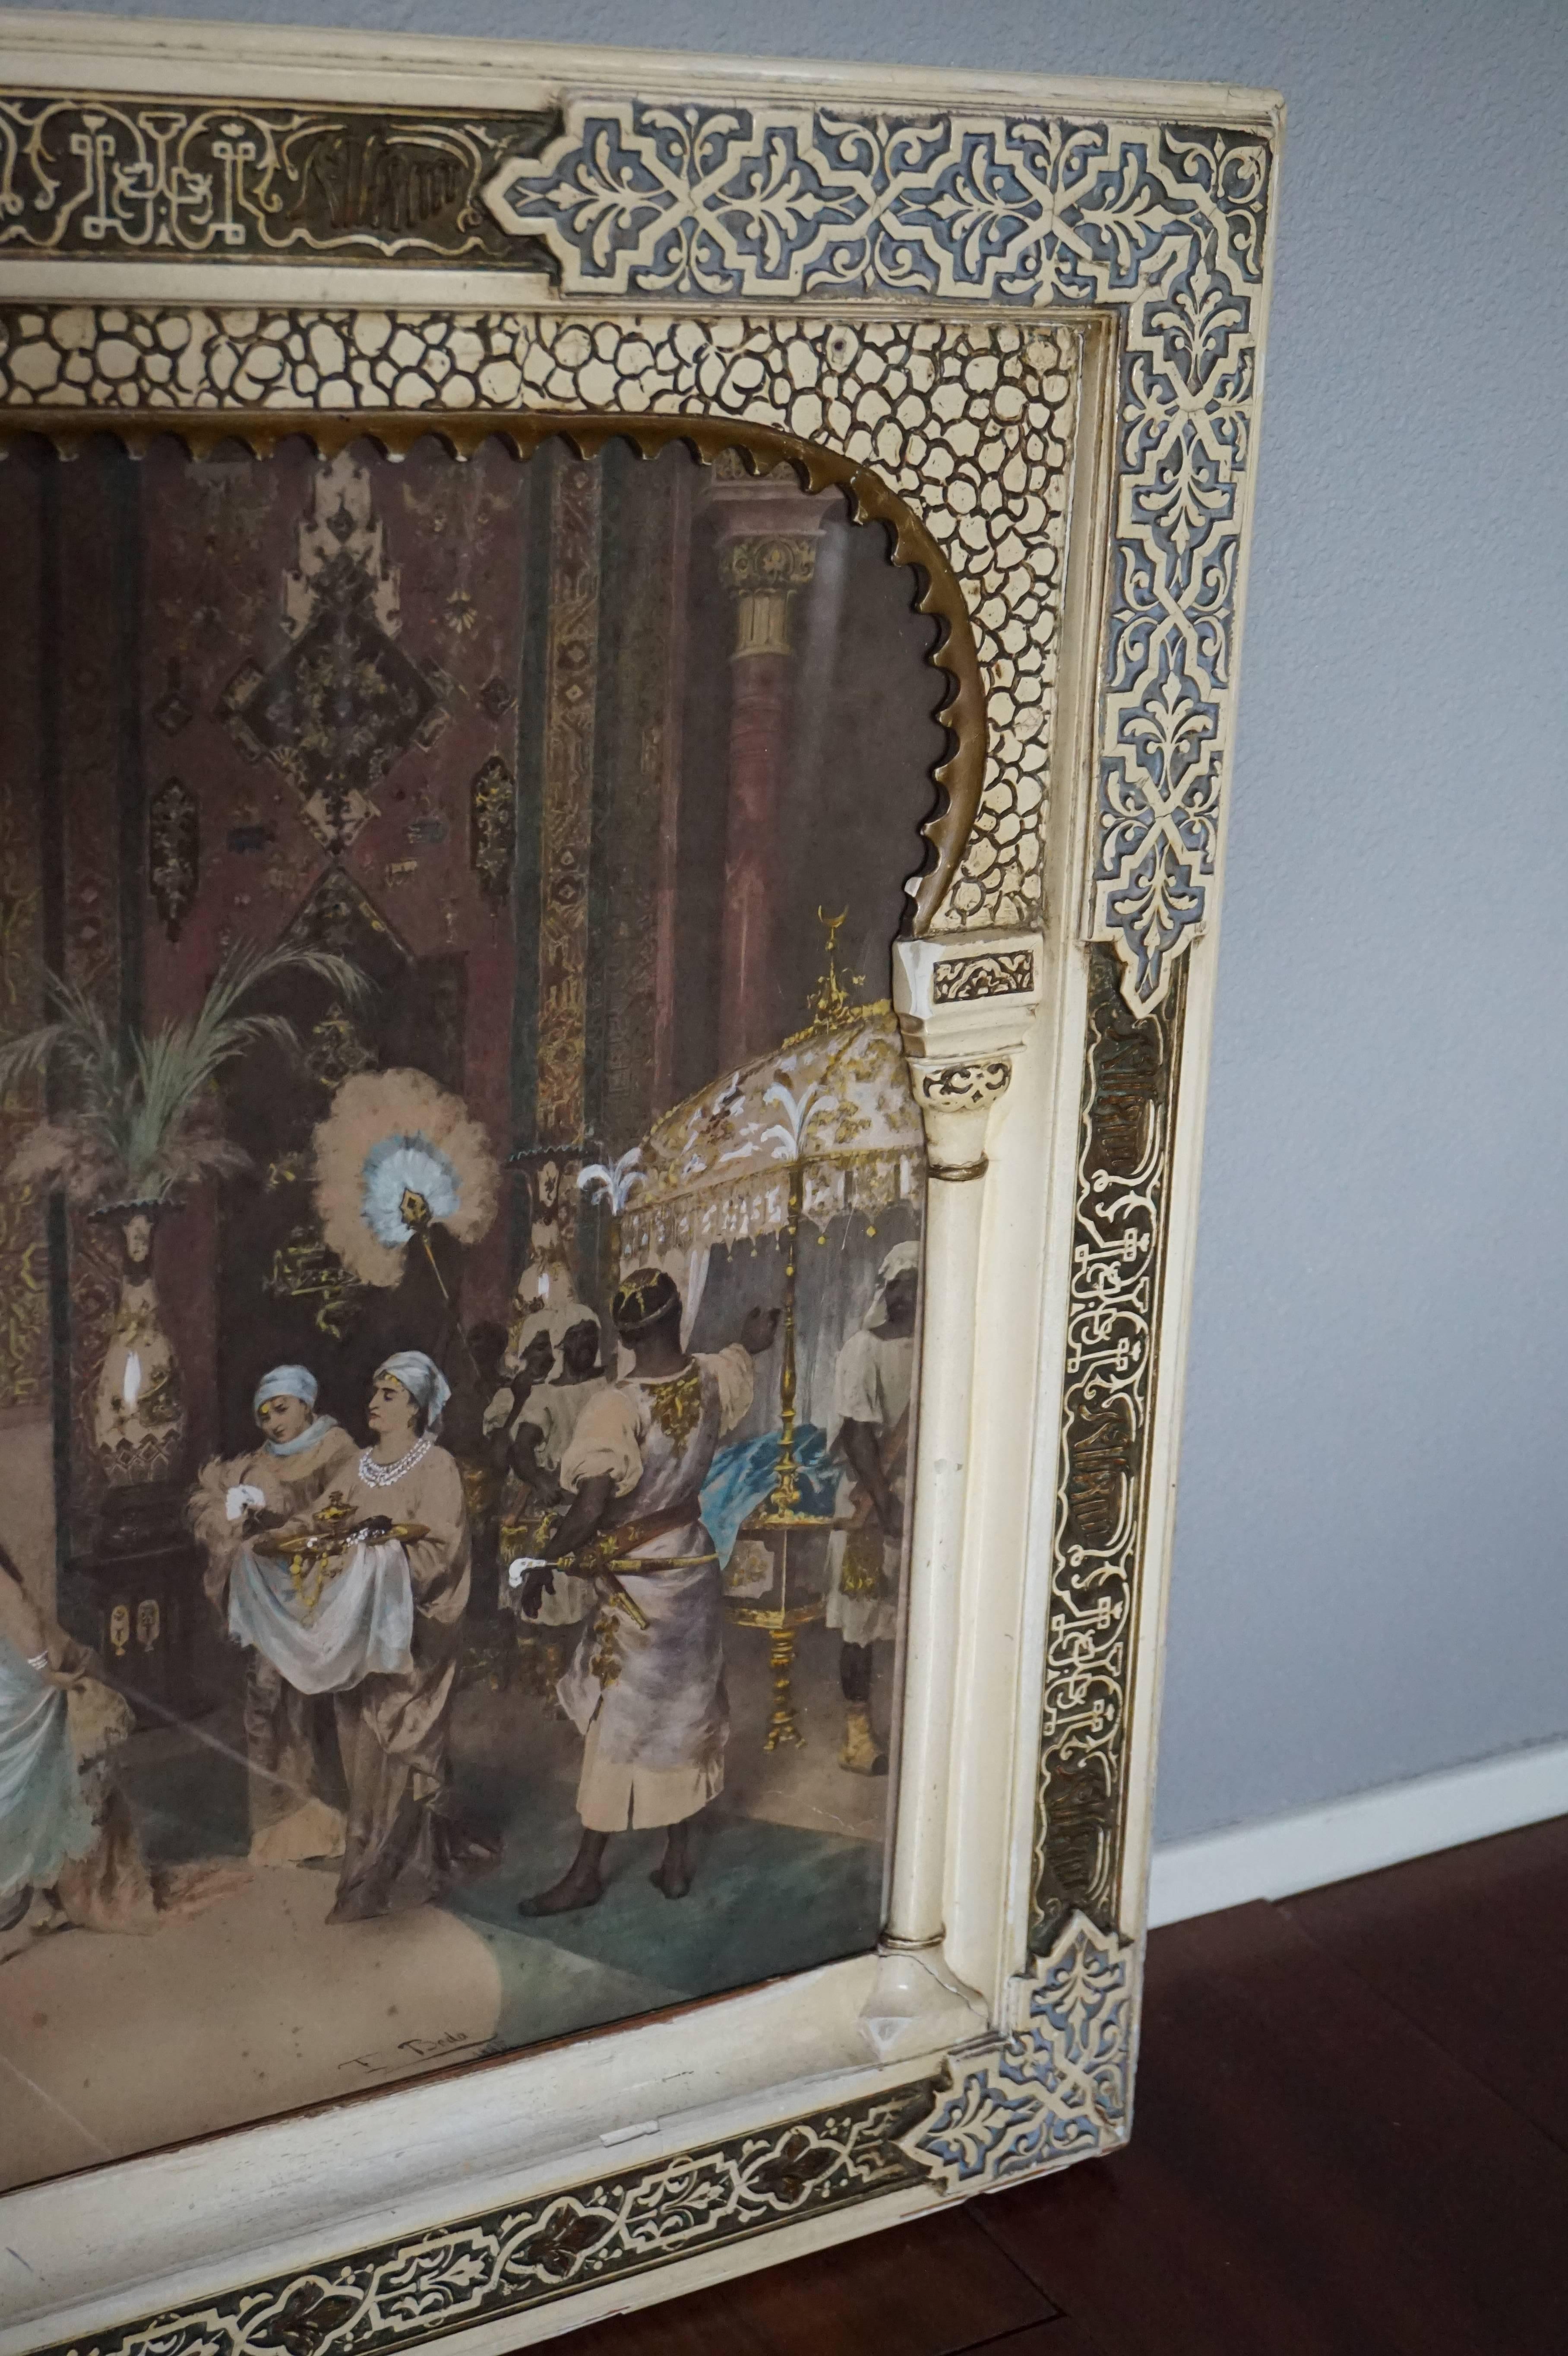 Antique, unique and important 19th century 'Gesamtkunstwerk'.

This unique, late 19th century Arabic frame with Islamic motifs (and a word of which we don't know the meaning), was specially made for the rare Francesco Beda lithograph that it